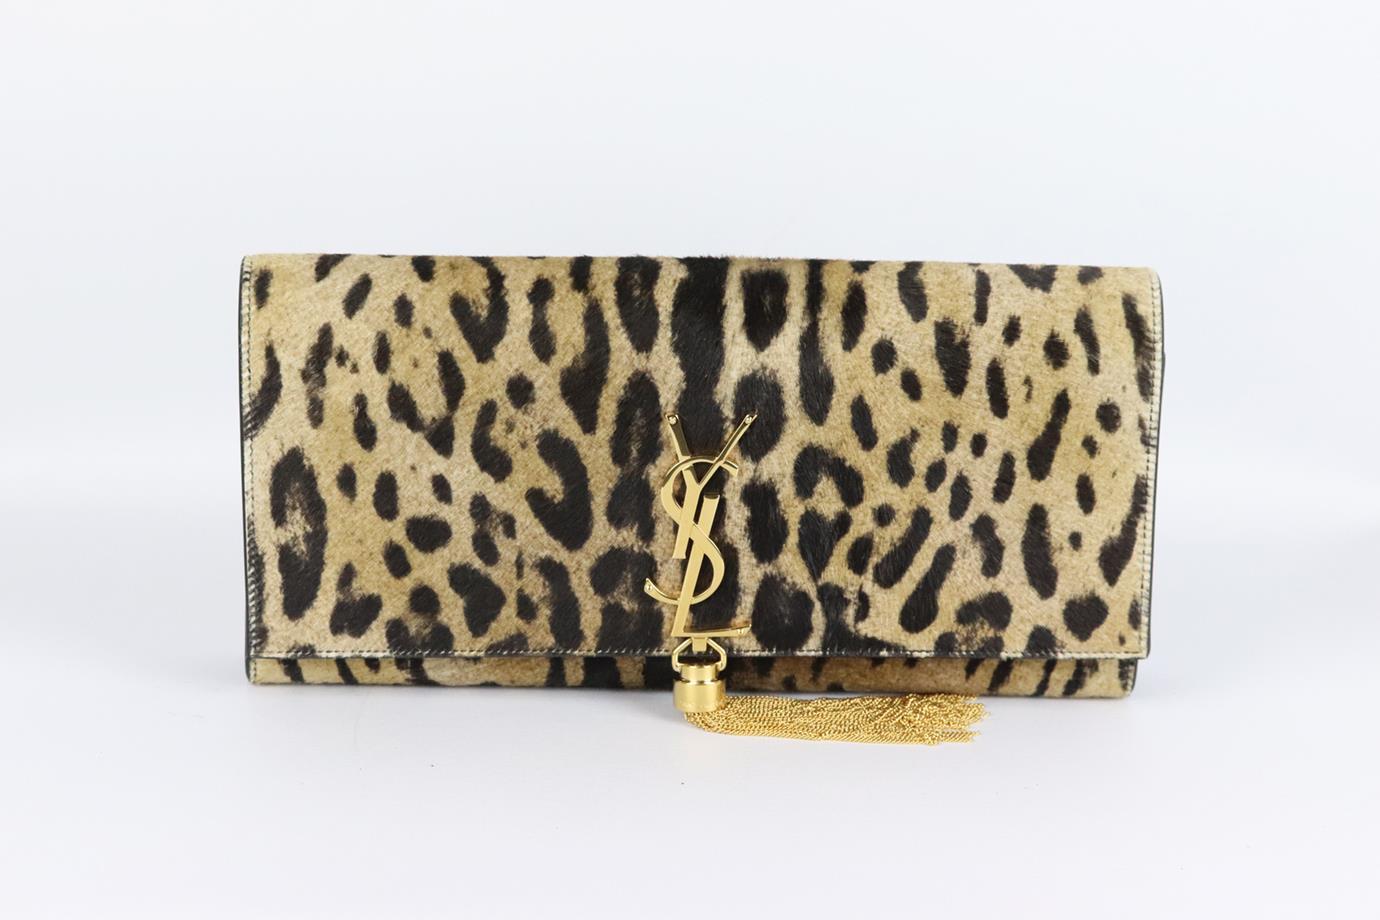 Saint Laurent Kate Monogramme leopard print calf hair and leather clutch. Made from brown and black leopard-print calf-hair and black leather with large gold-tone YSL plaque and tassel on the front, it has a large internal compartment with card